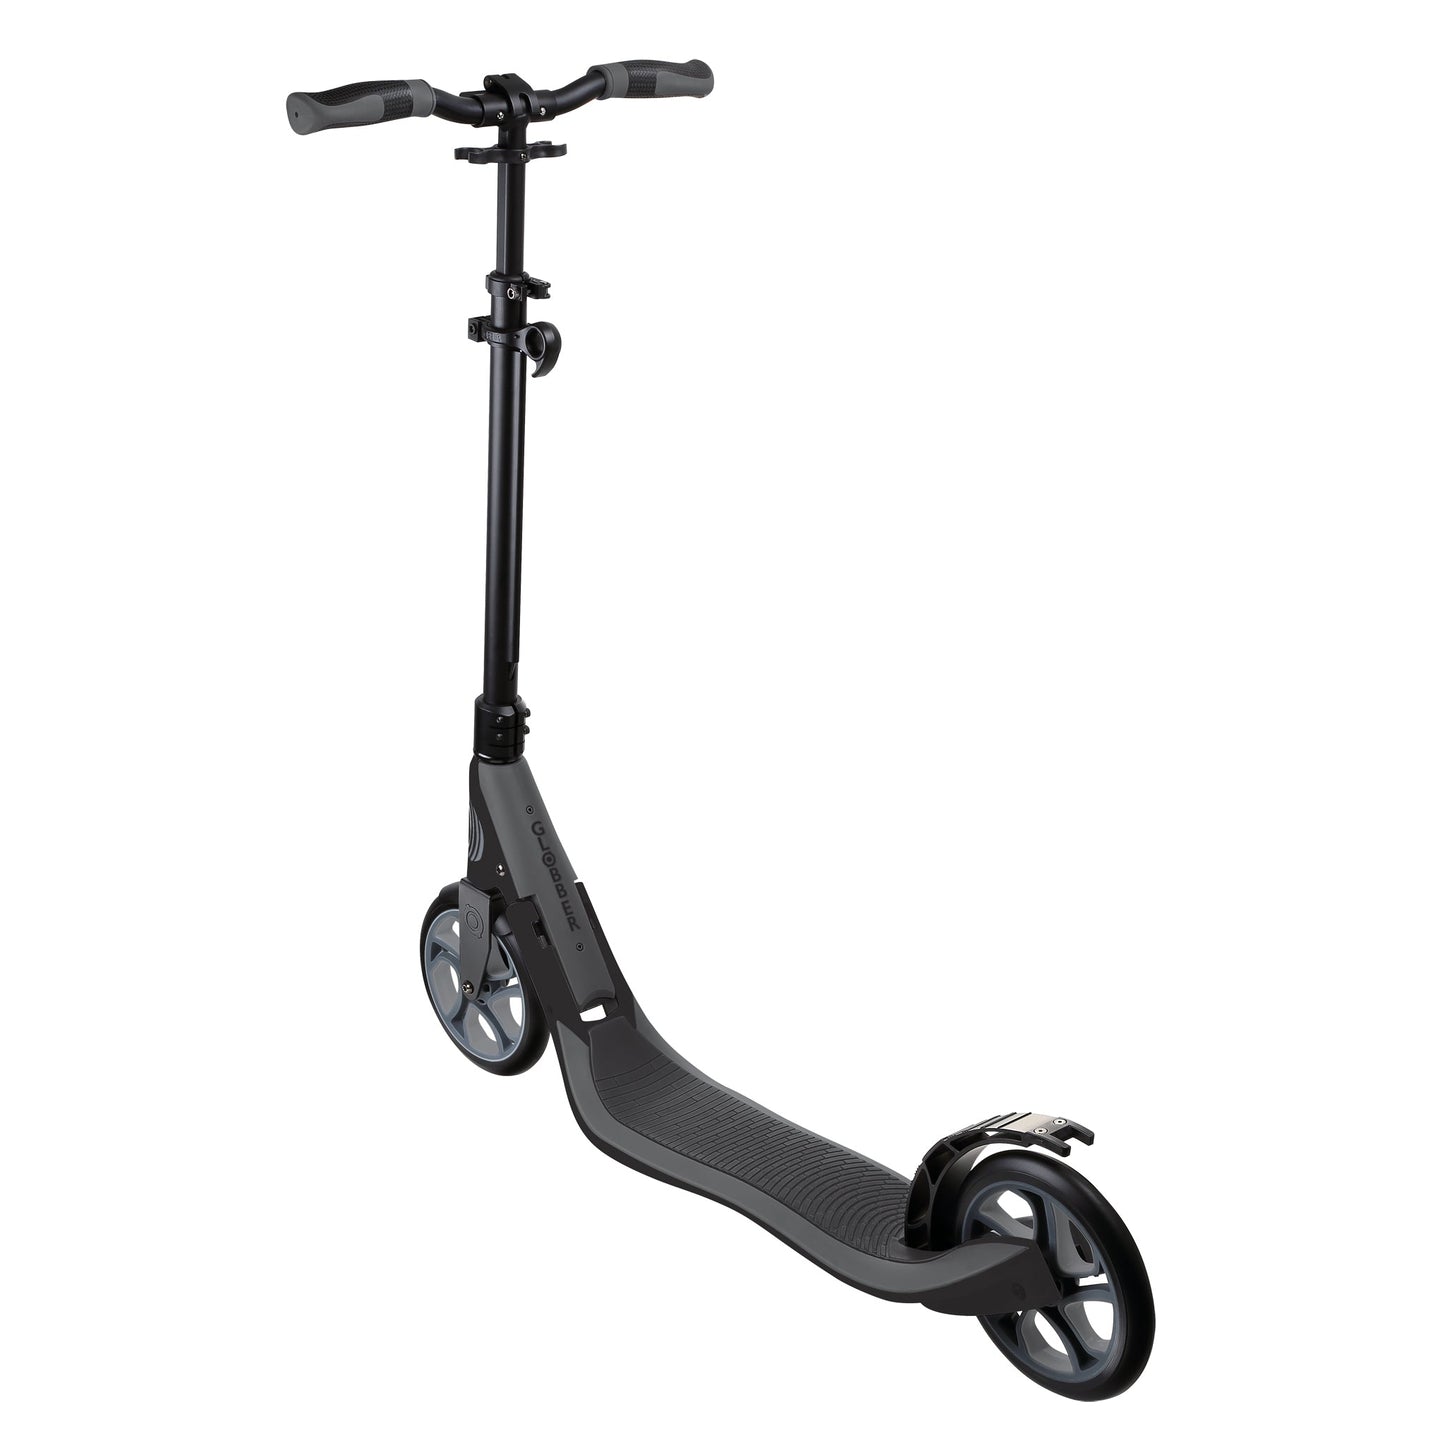 One NL 205: 2-Wheel Foldable Scooter for Teens and Adults - Charcoal Grey